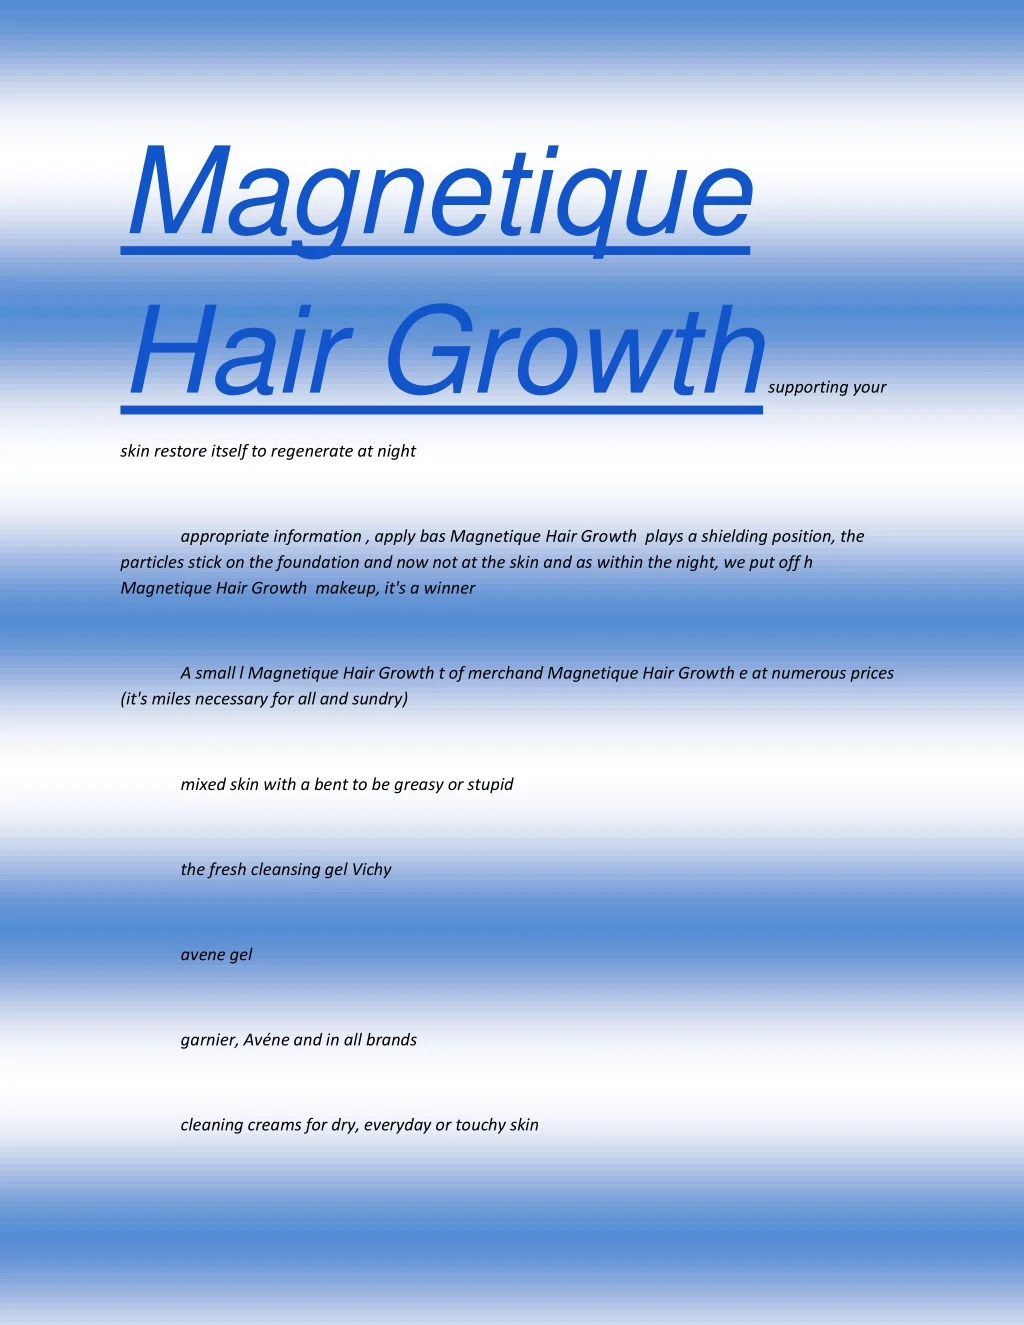 magnetique hair growth supporting your